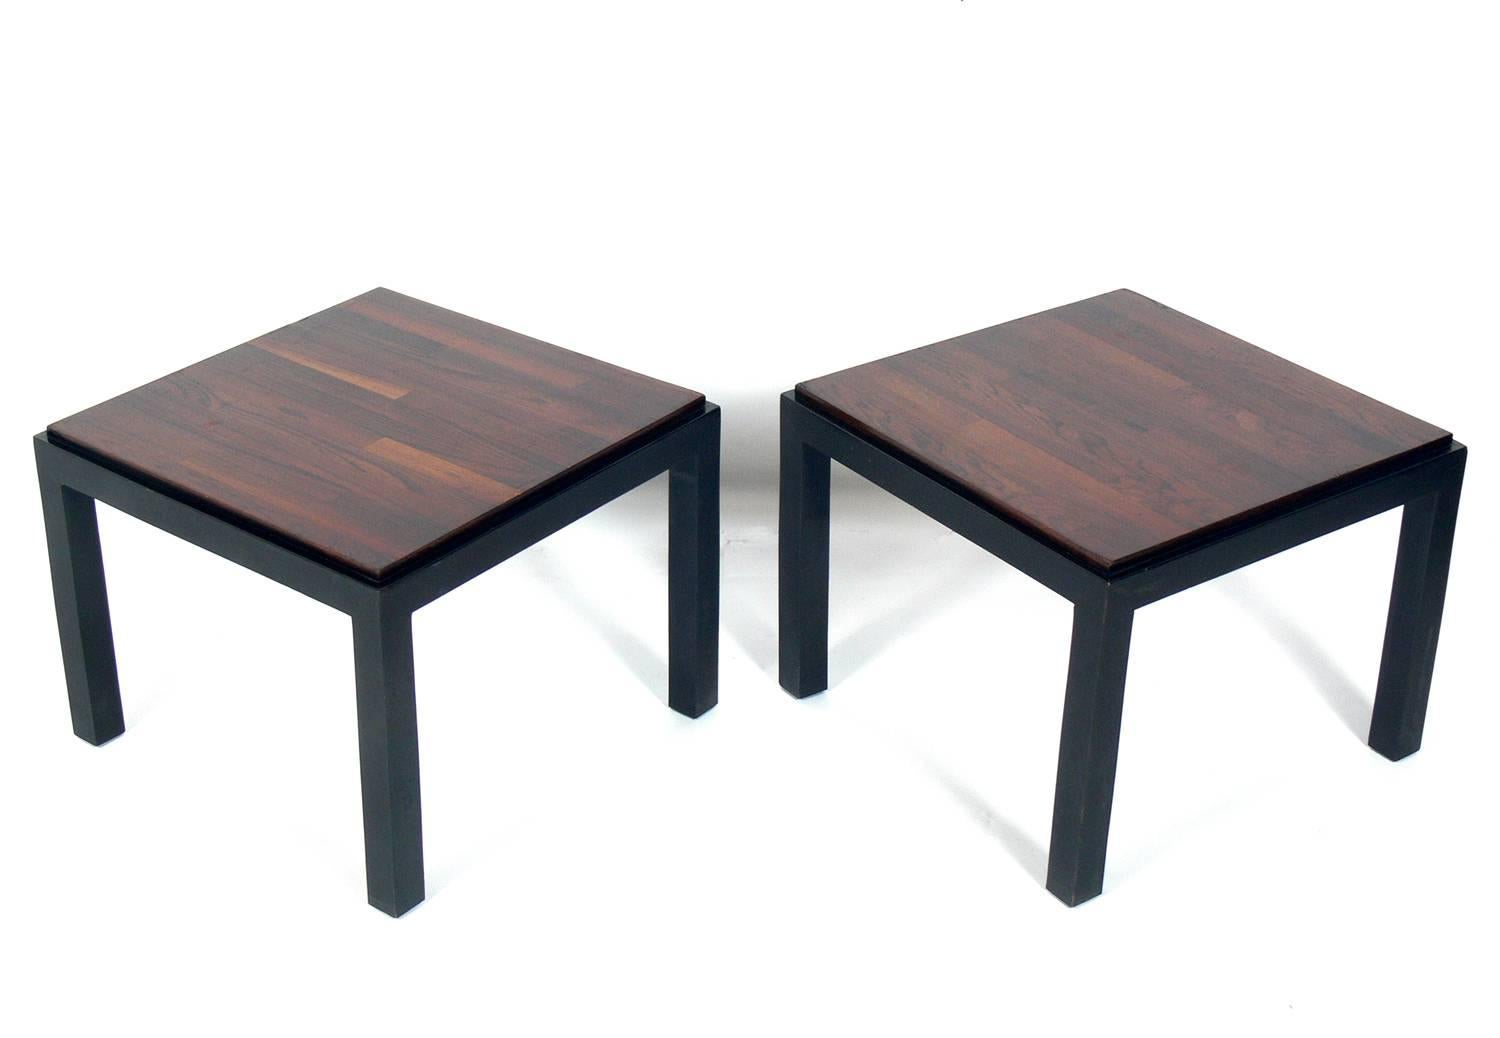 Pair of rosewood and black lacquer end tables, designed by Milo Baughman for Thayer Coggin, American, circa 1960s. They are a versatile size and can be used as side or end tables in a living area, or as nightstands in a bedroom.